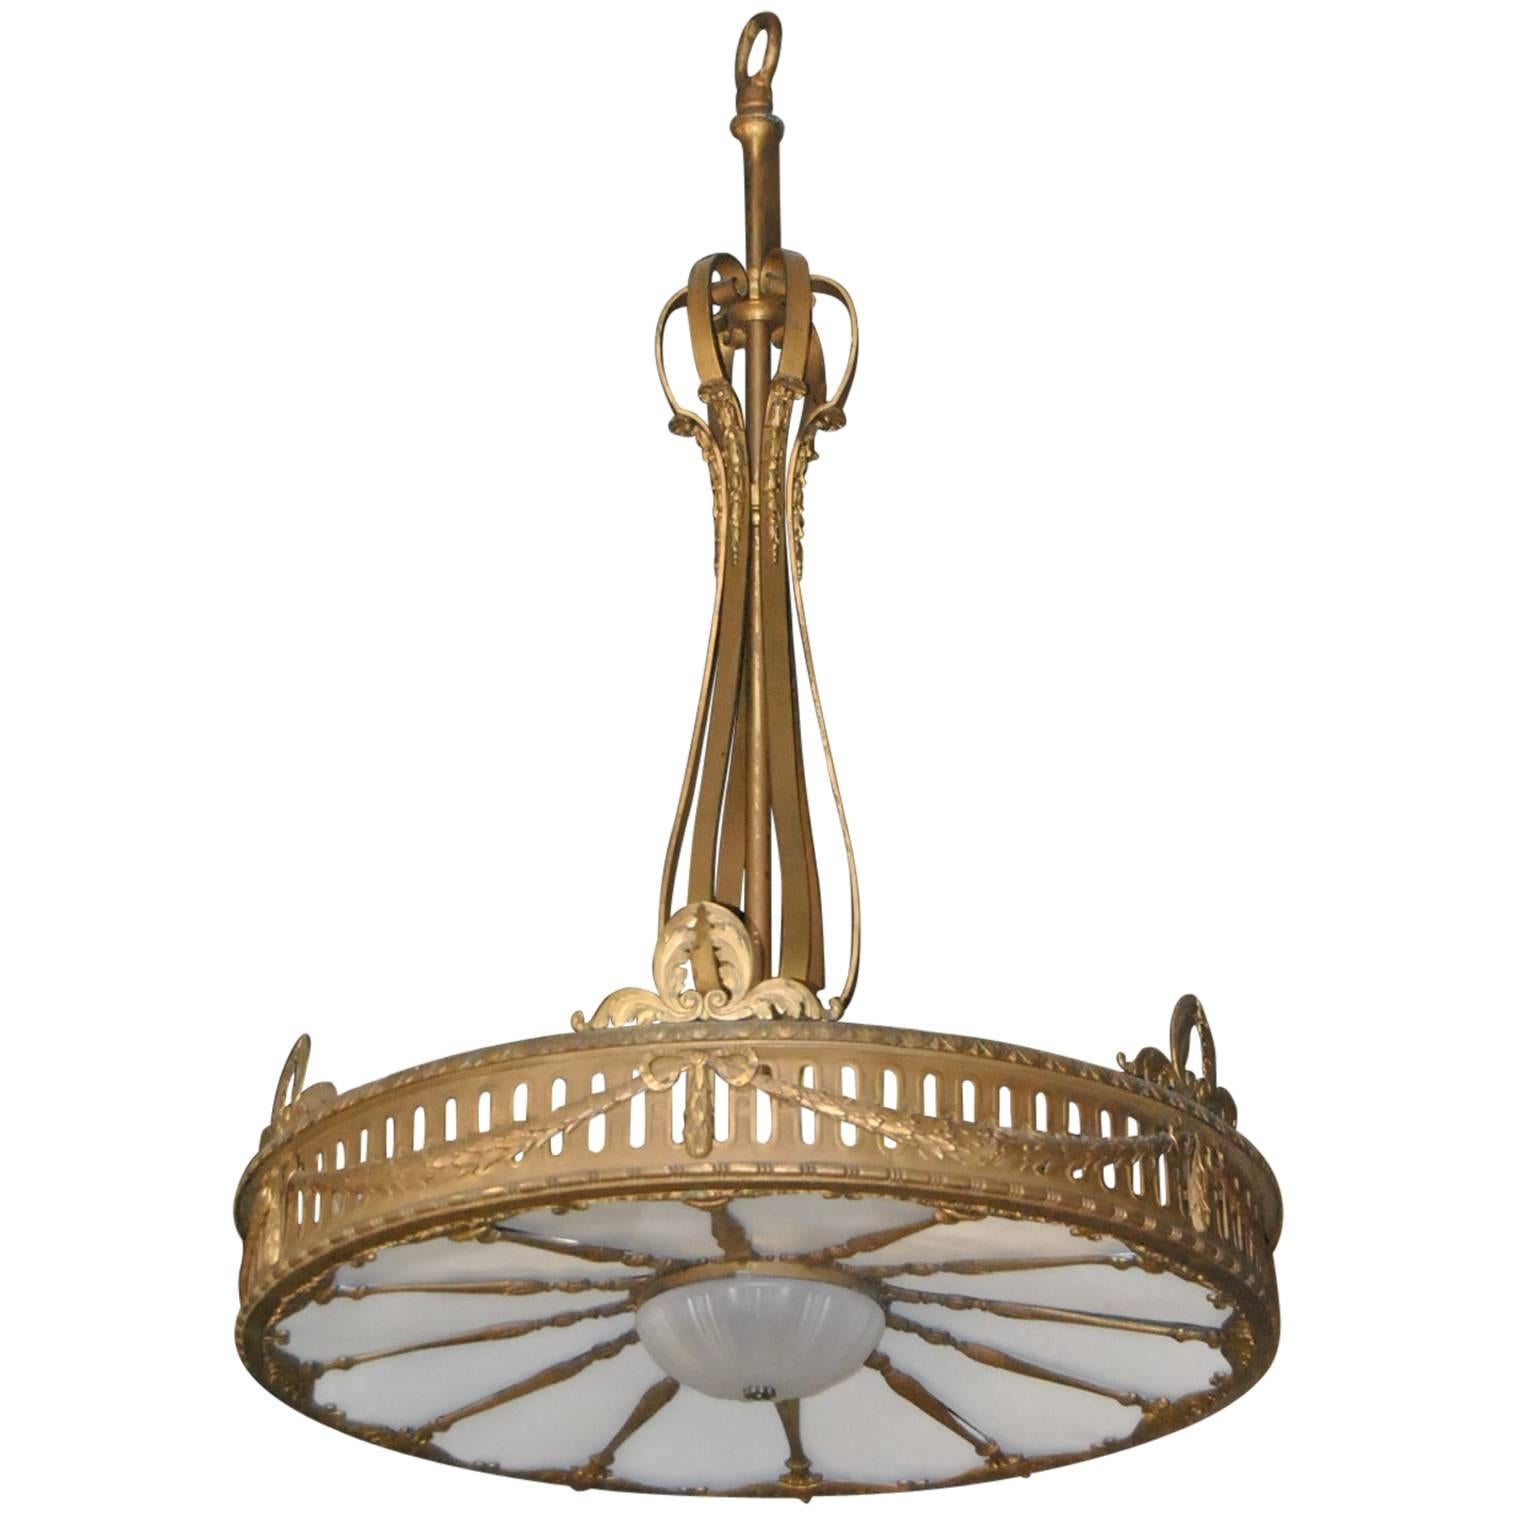 Oversized (72" Tall by 48" Wide) Bronze Neoclassic Style Twelve-Light Chandelier For Sale